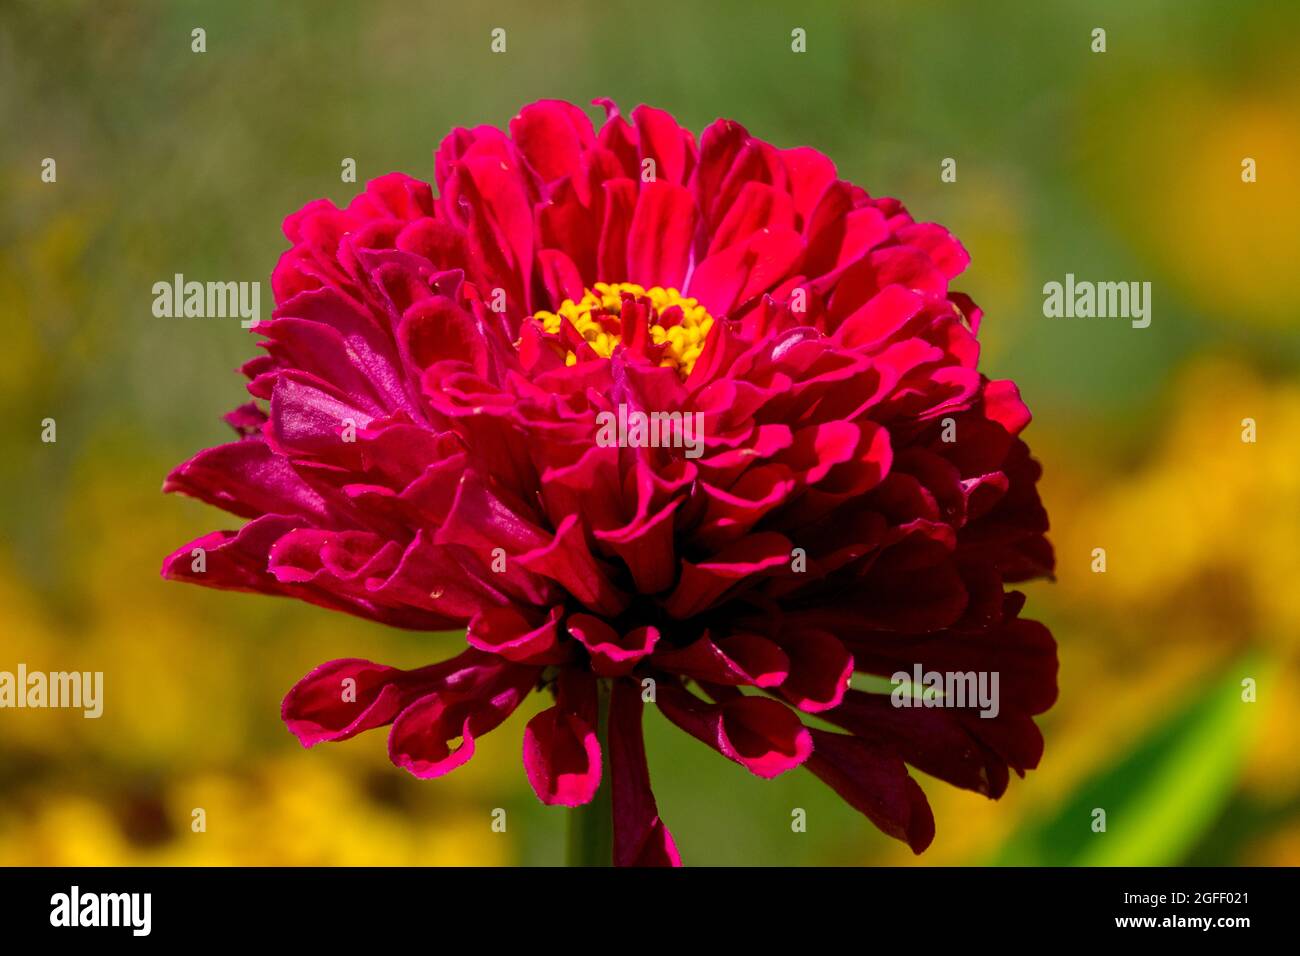 Red Zinnia Flower Single Violet August Bloom Stock Photo